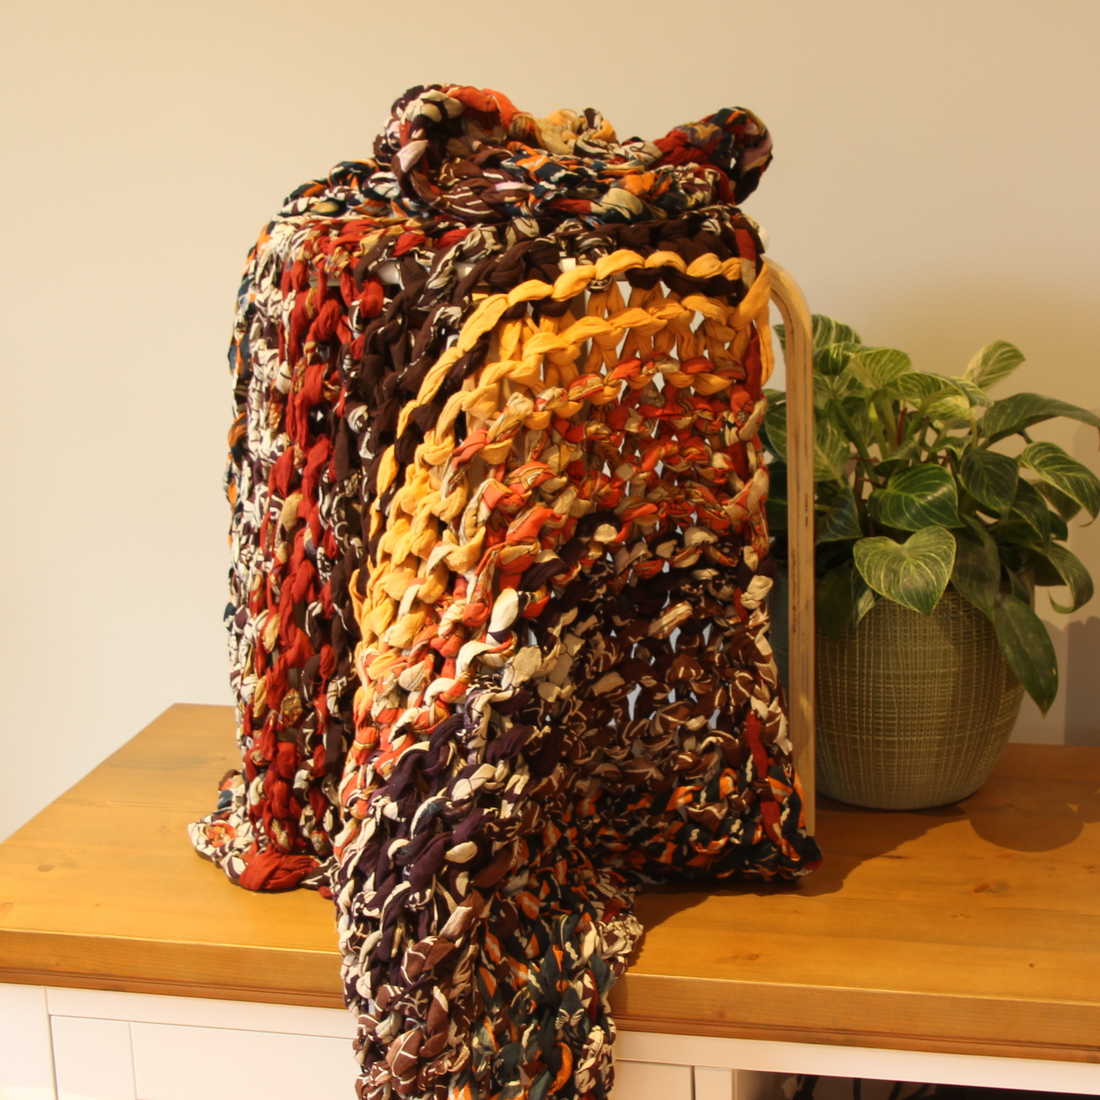 Blankets fair trade ethical sustainable fashion Knotted Throw - Oranges & Browns conscious purchase Basha